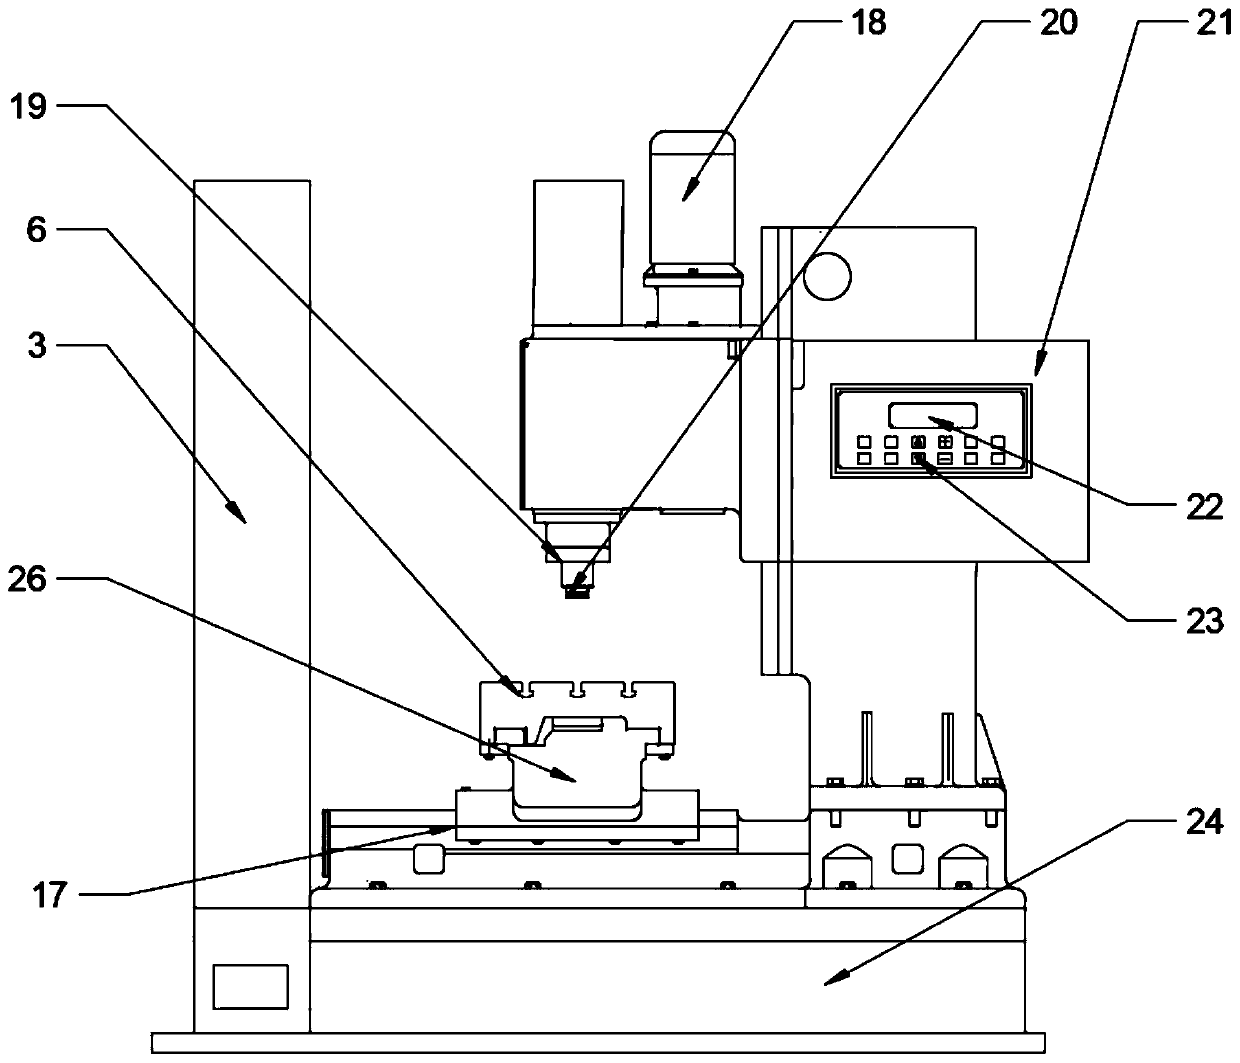 High-precision automatic printing machine information identification system based on external bar code